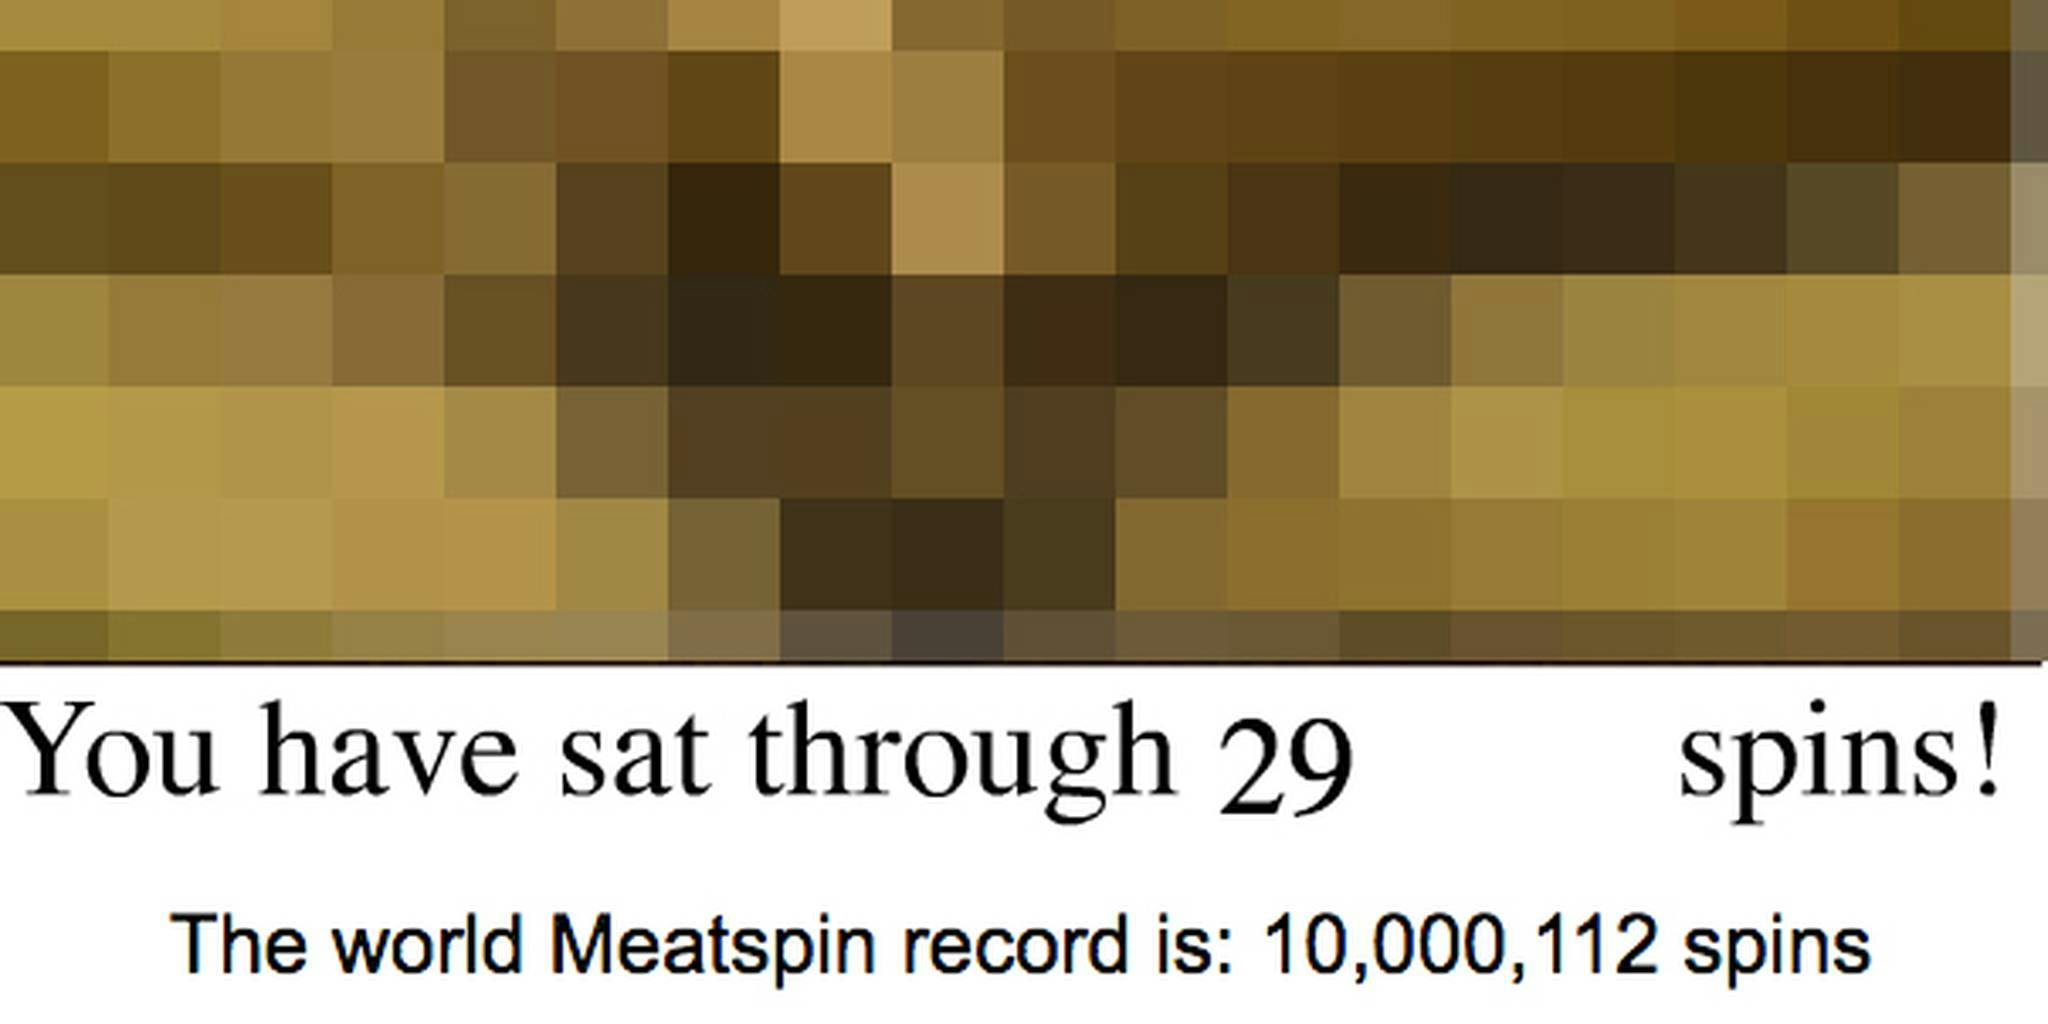 Meatspin, one of the original shock sites, is a relic of a different time